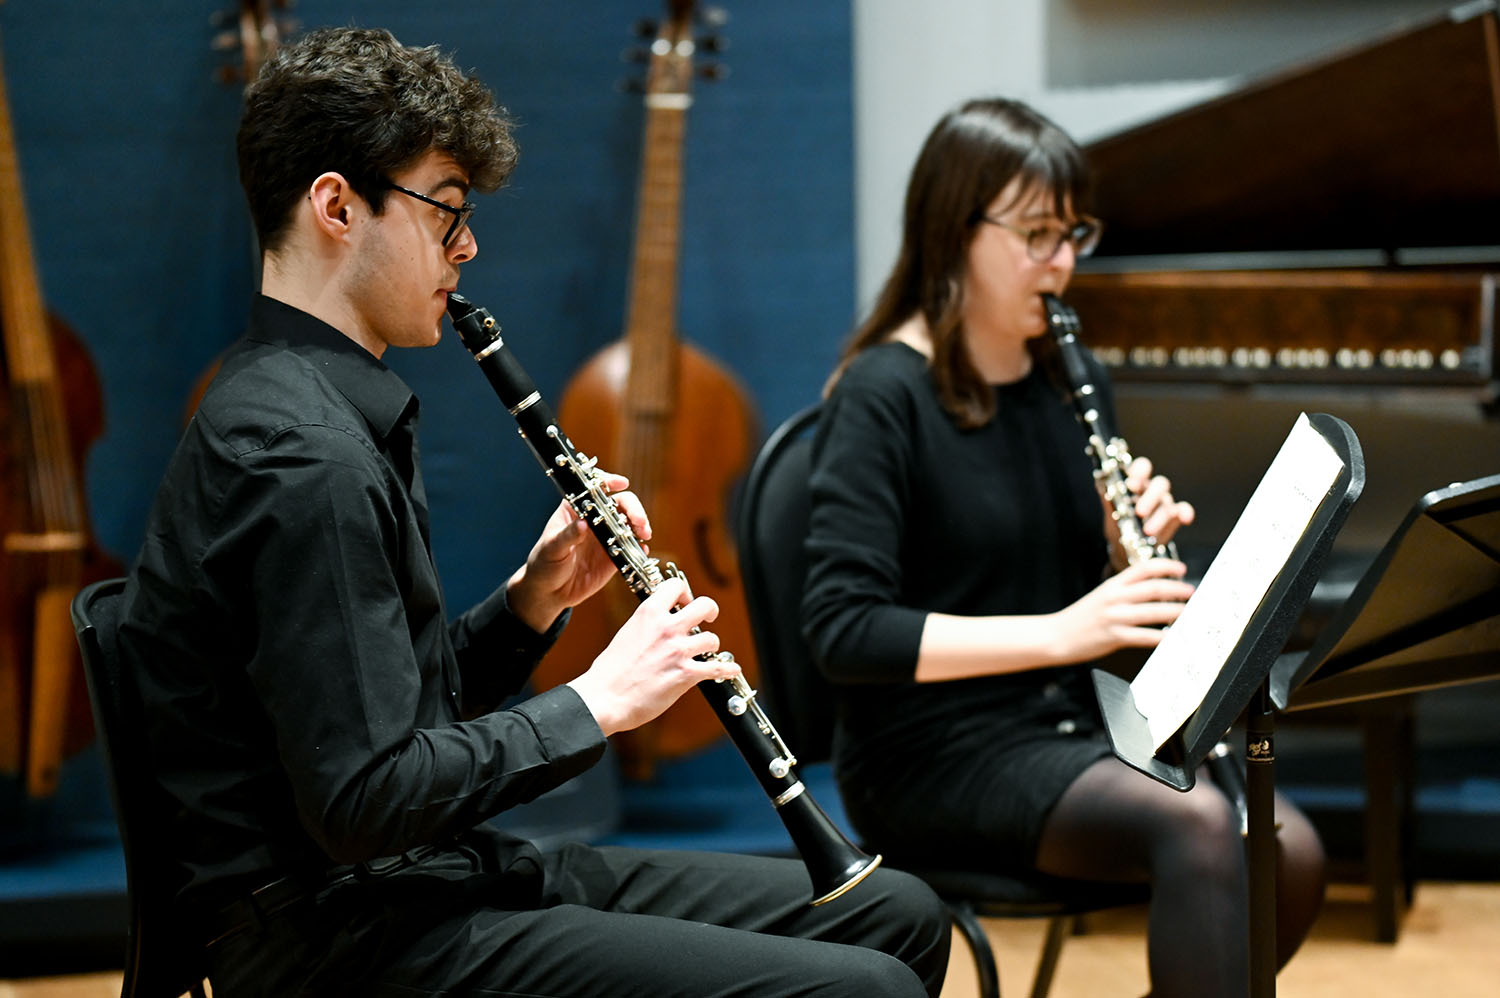 Two clarinet players performing in the RCM Museum